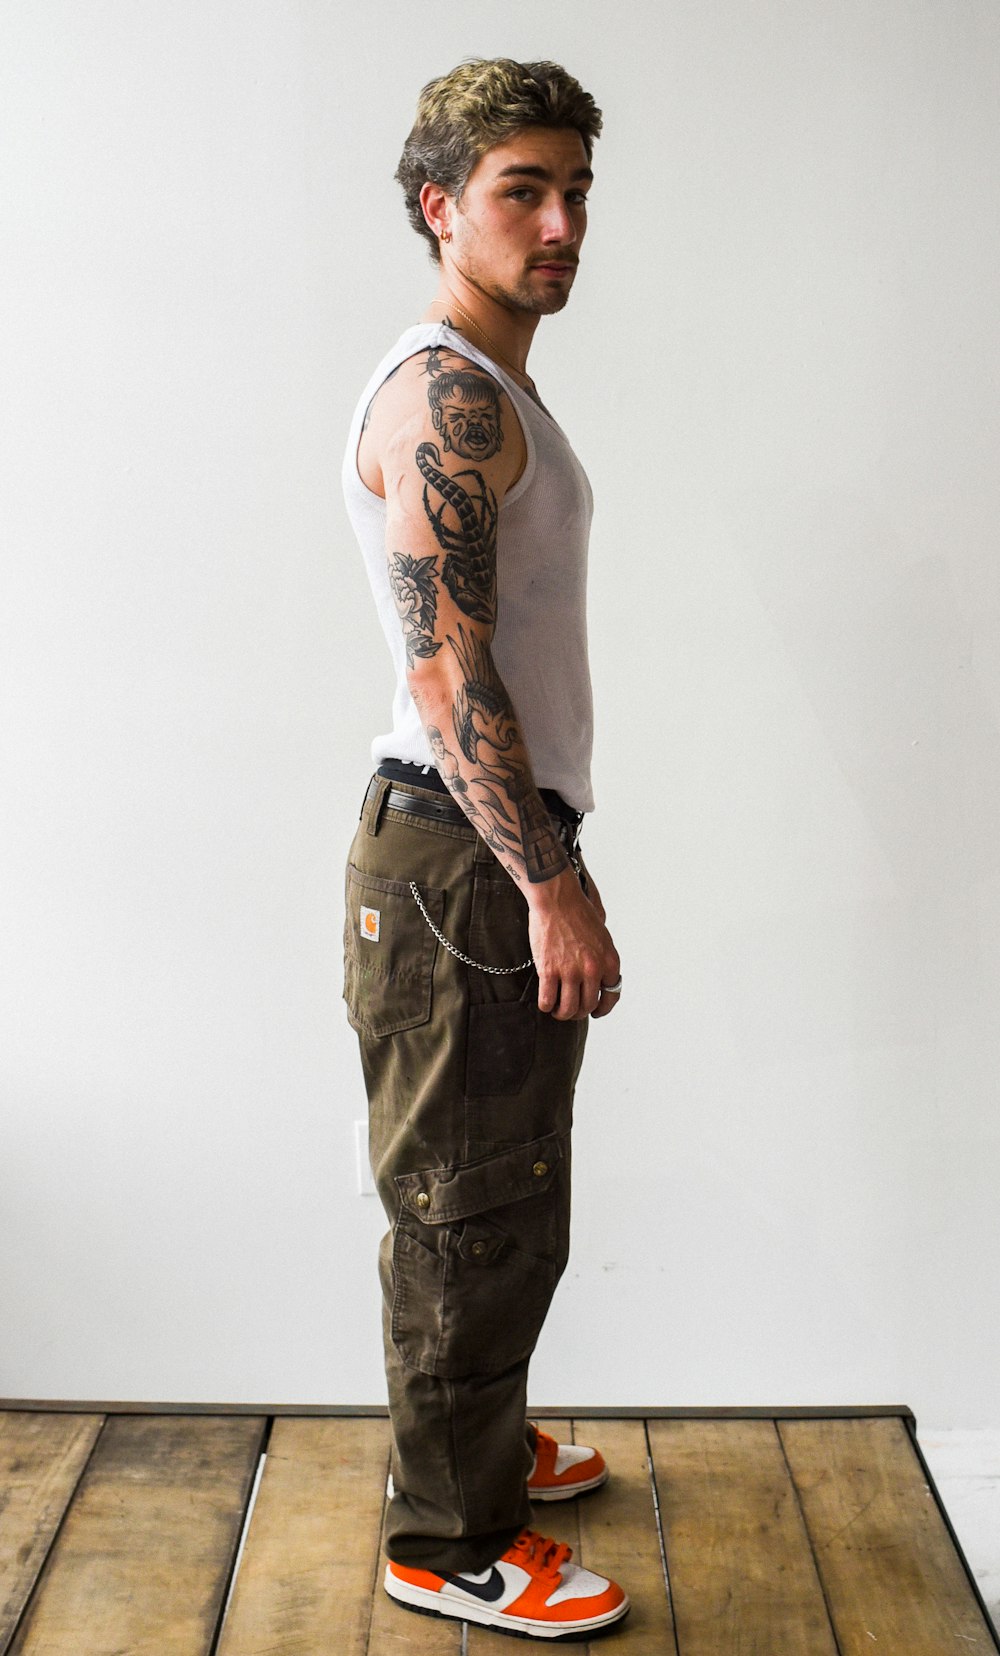 a man with tattoos standing on a wooden floor